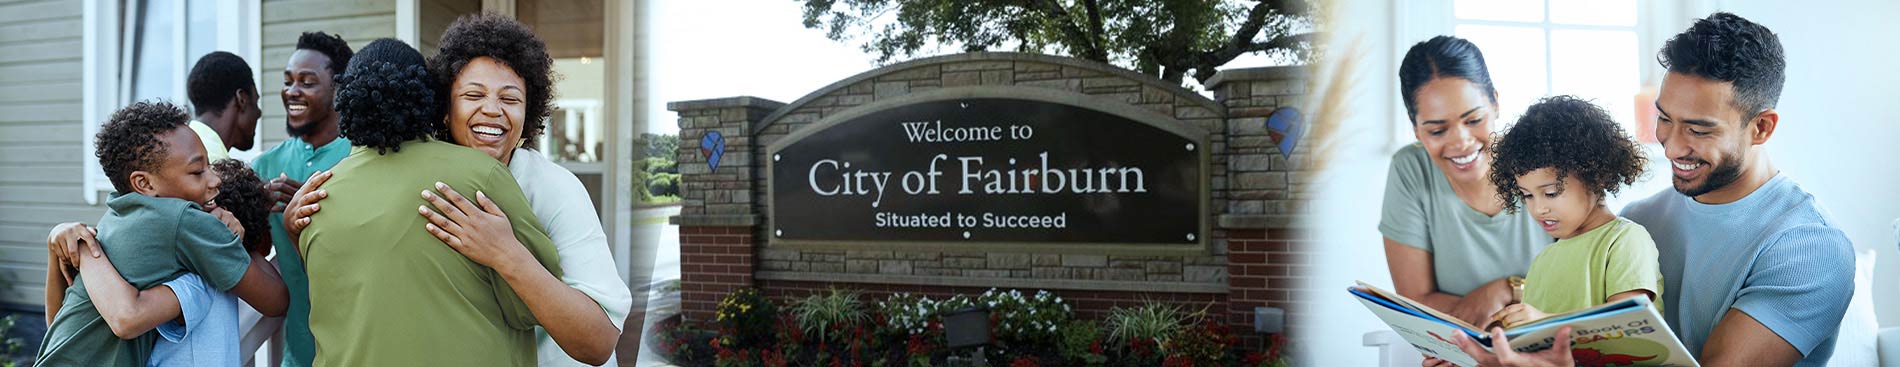 From left: Family embracing on front porch, City of Fairburn sign, Couple reading to child